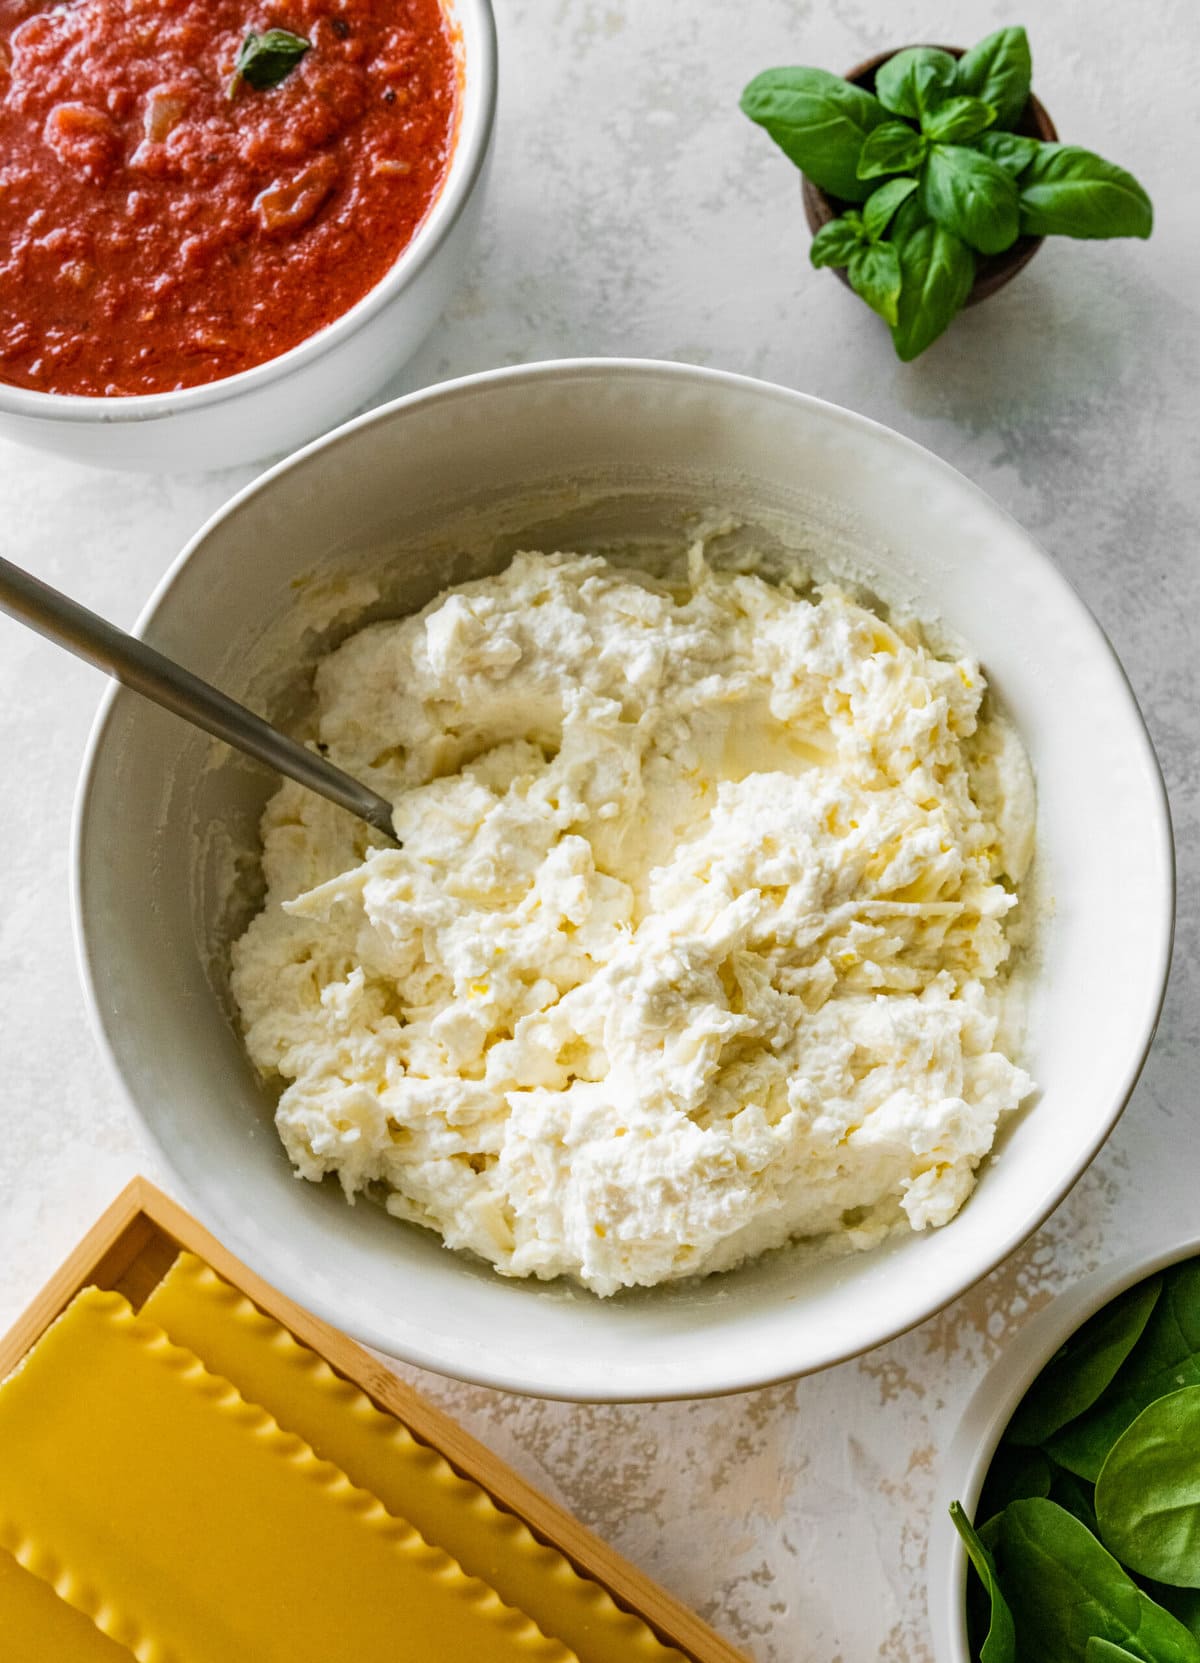 How to make Easy Mediterranean Lasagna Process- making the ricotta and cheese filling